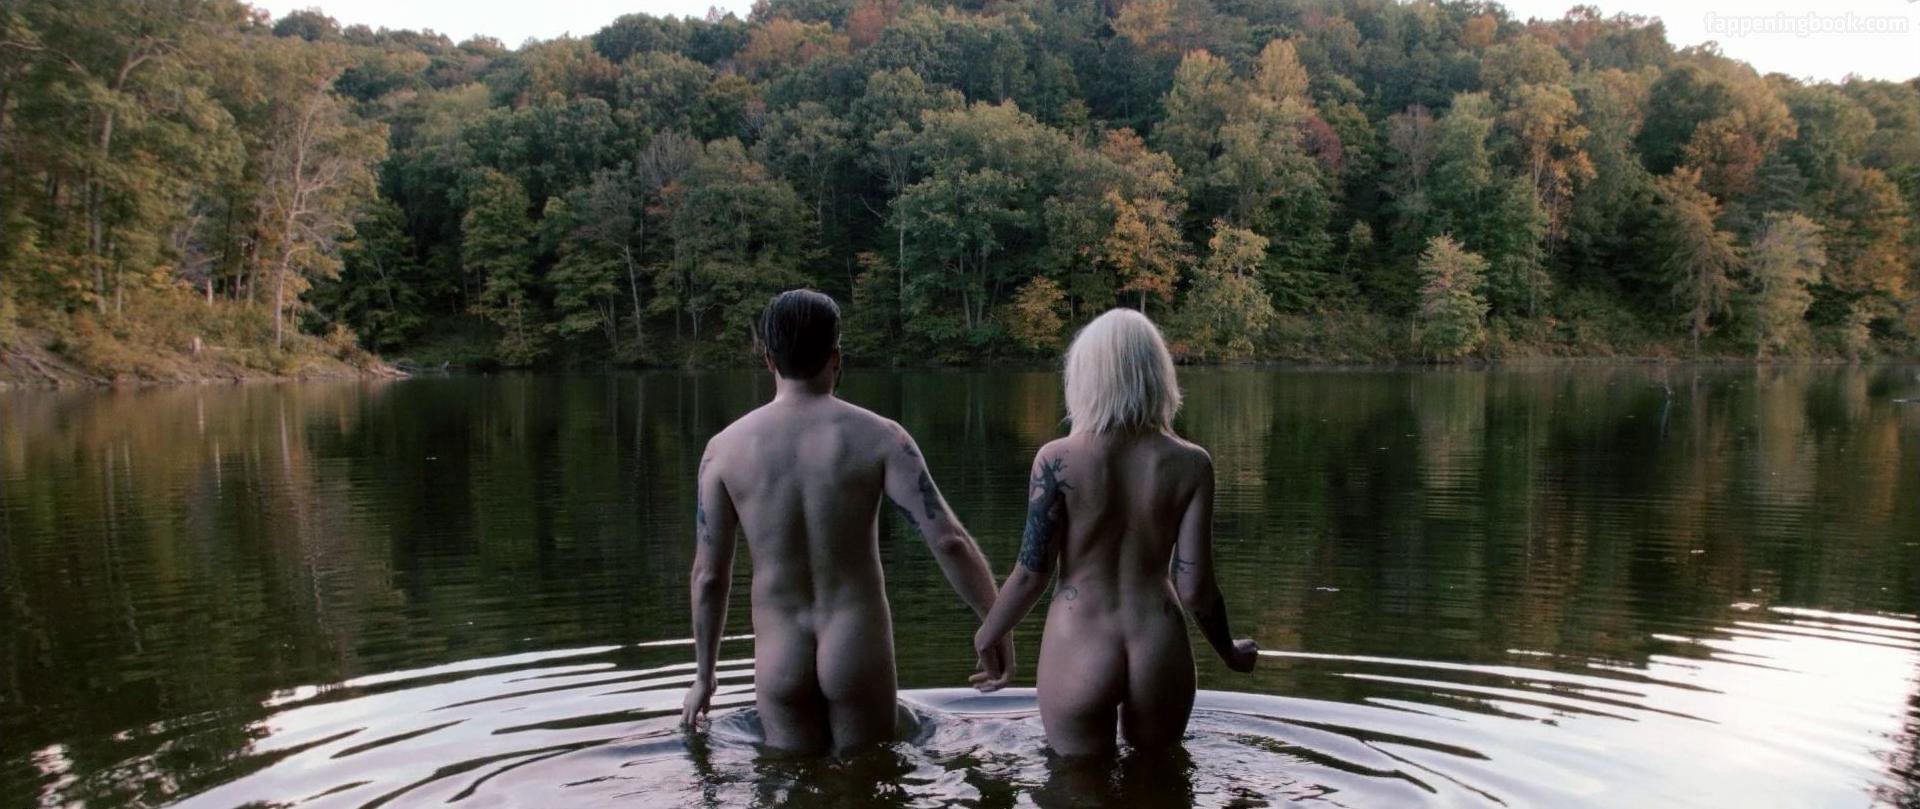 Nude Roles in Movies: Harvest Lake (2016), Space Babes from Outer Space (20...